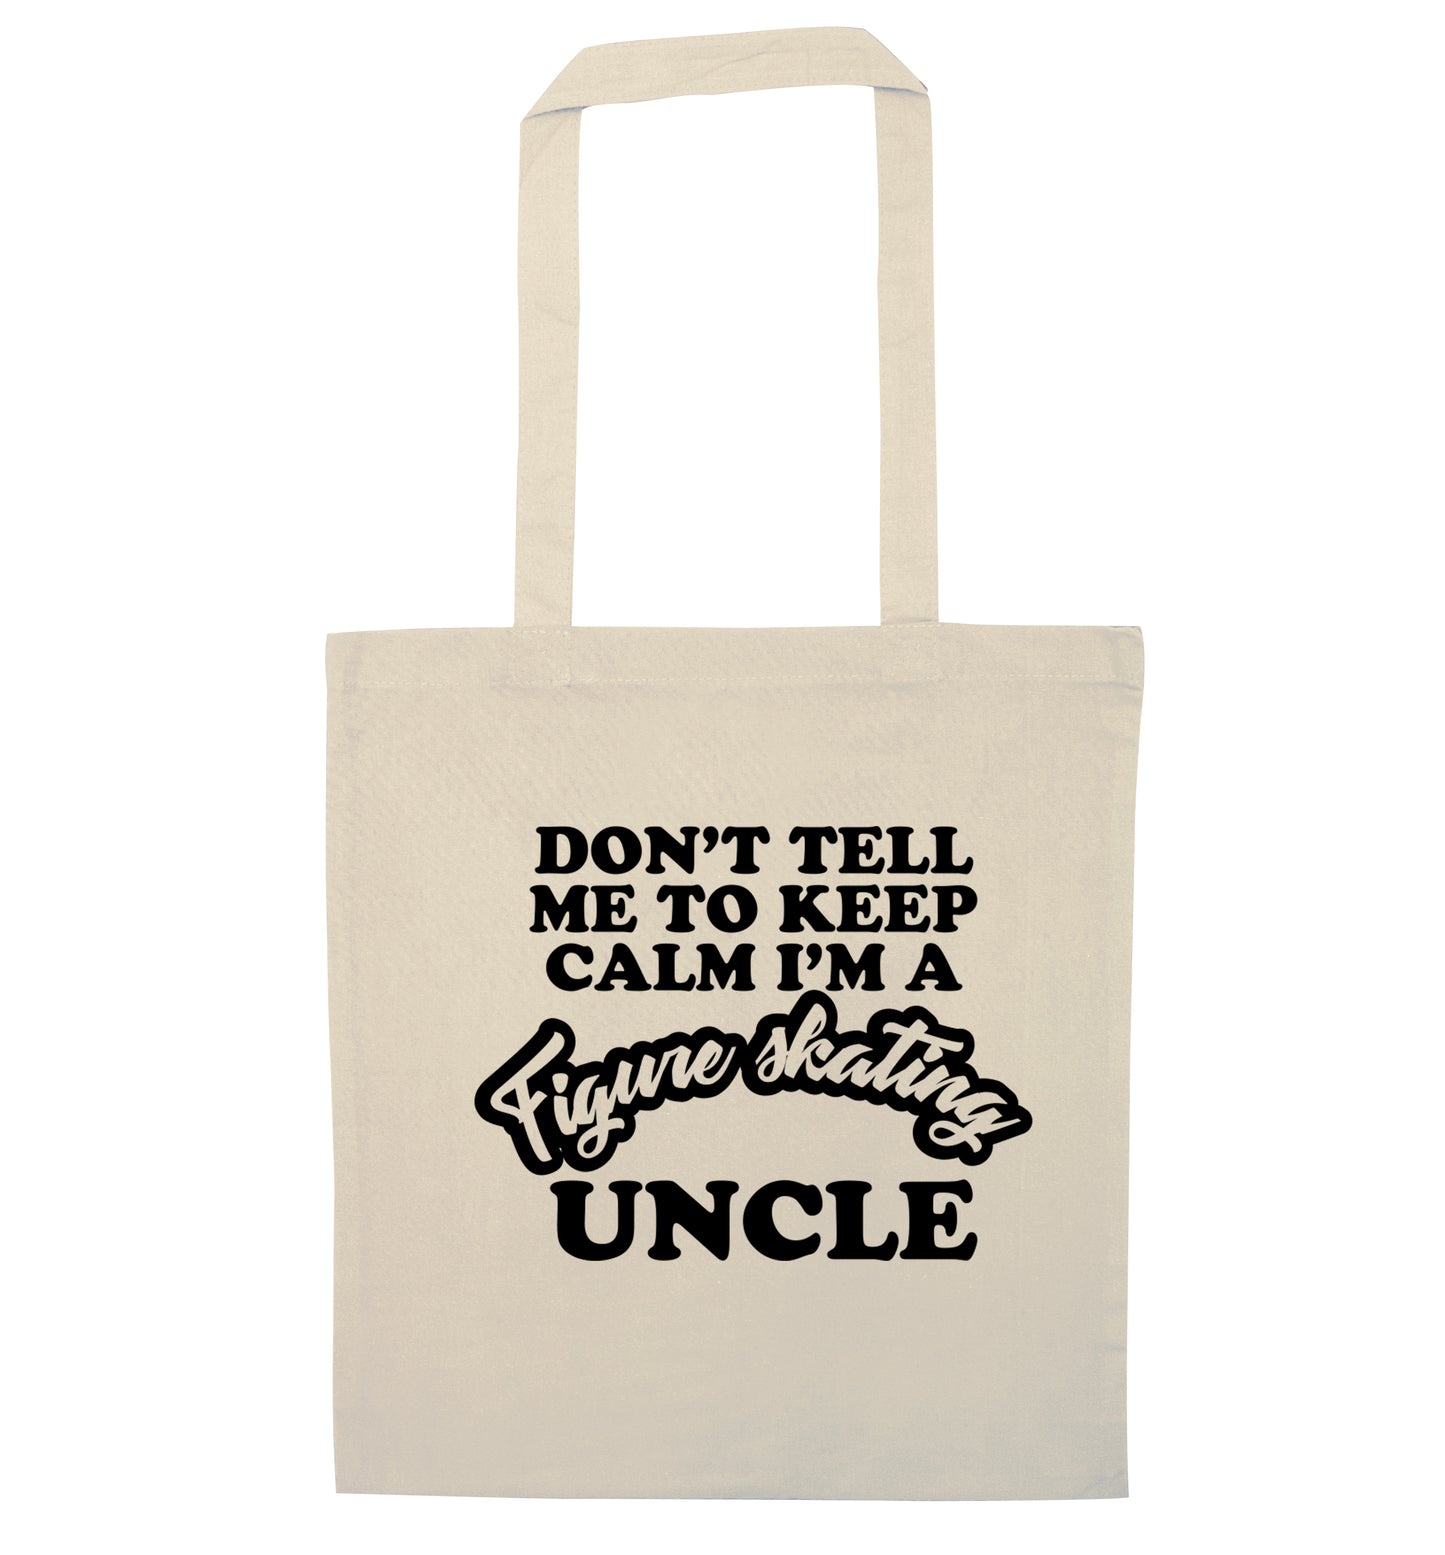 Don't tell me to keep calm I'm a figure skating uncle natural tote bag